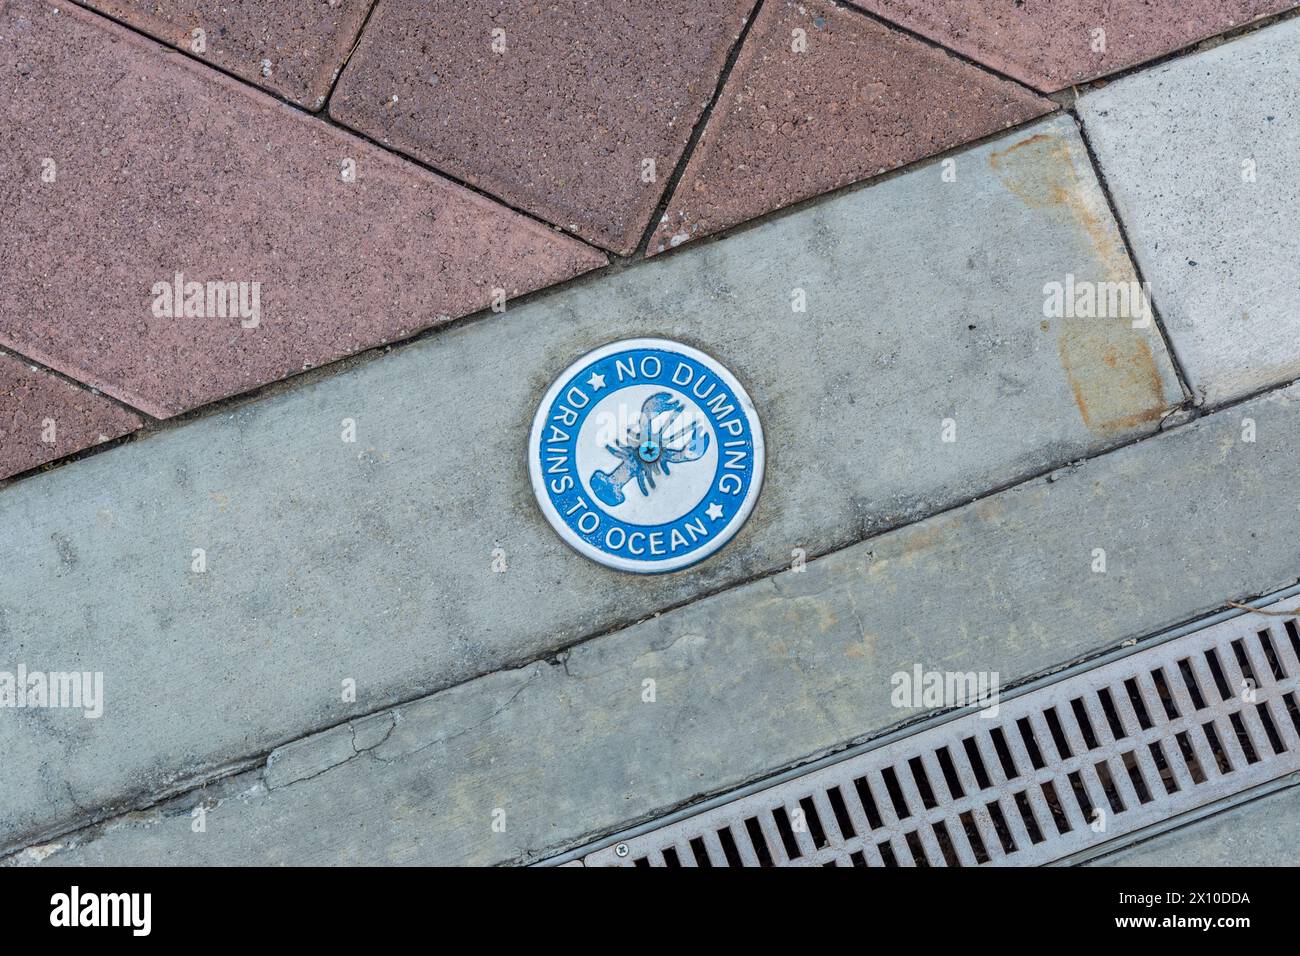 A sign in Los Angeles warns that improper disposal into the storm drain can pollute the ocean Stock Photo